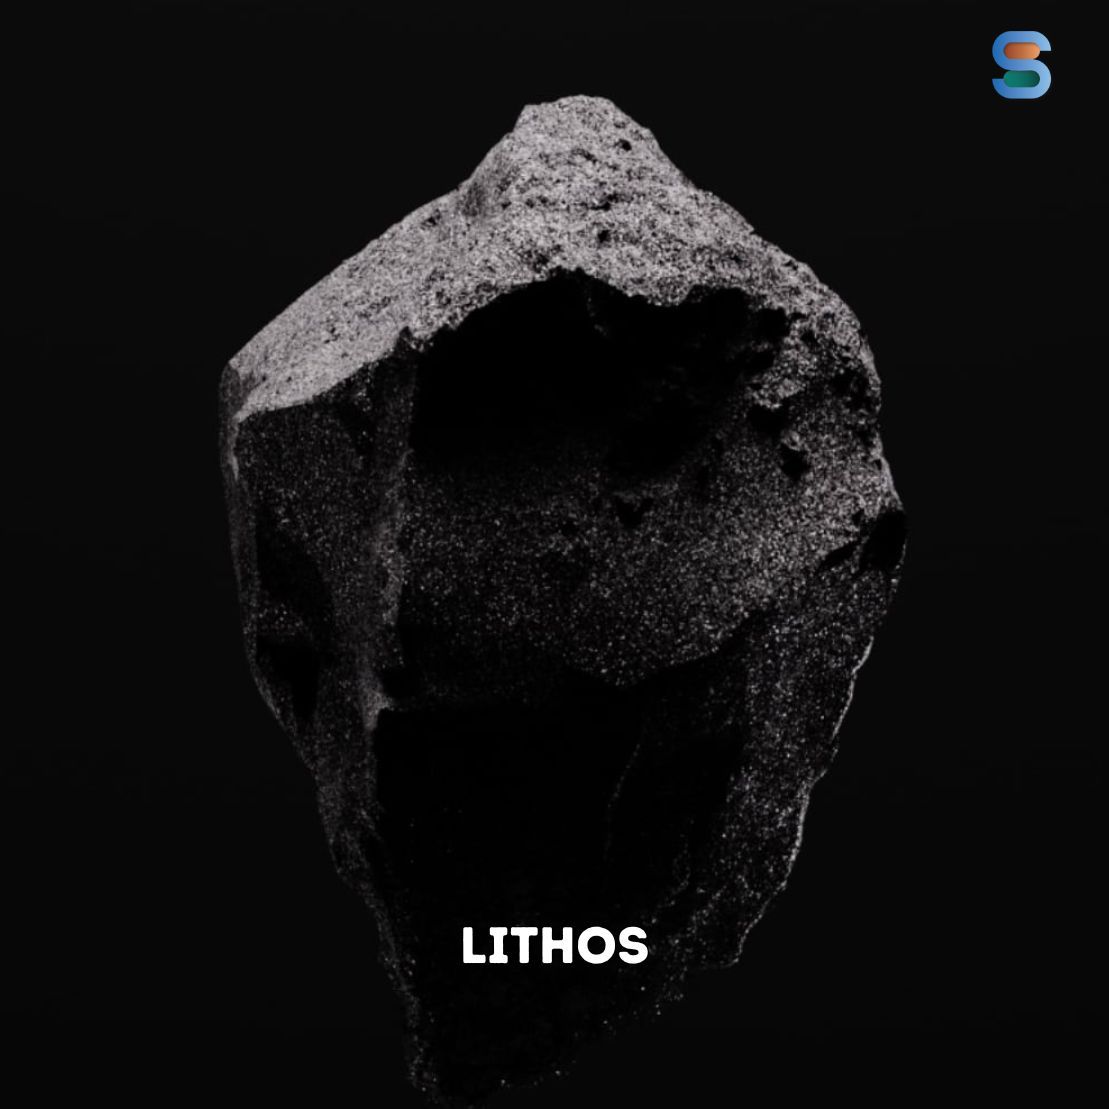 Basalt dust, used by Lithos on farmland, captures carbon and fertilizes the soil when it rains. This method offers a scalable solution for carbon capture while also benefiting agriculture. #Lithos #CarbonCapture #ClimateInnovation